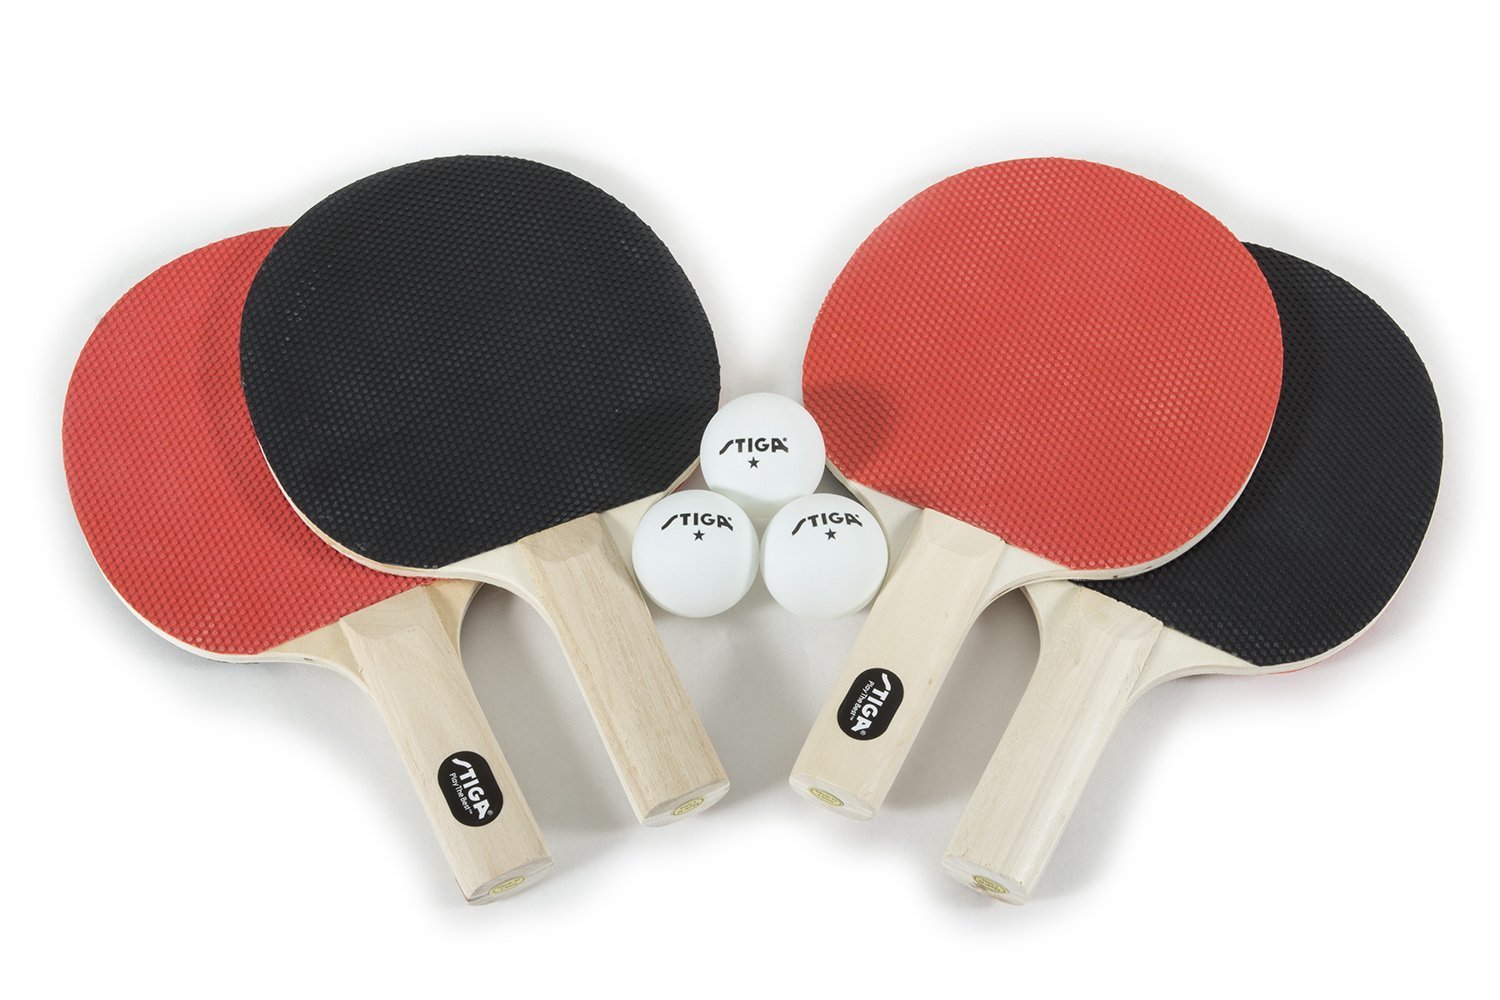 Cadrim Ping Pong Paddle Set Table Tennis Paddles Set Portable with Extendable Net 2 Bats Ping Pong Paddles 3 Table Tennis Balls Portable Game Storage Case Racket Bat Set Pingpong Indoor Outdoor Play